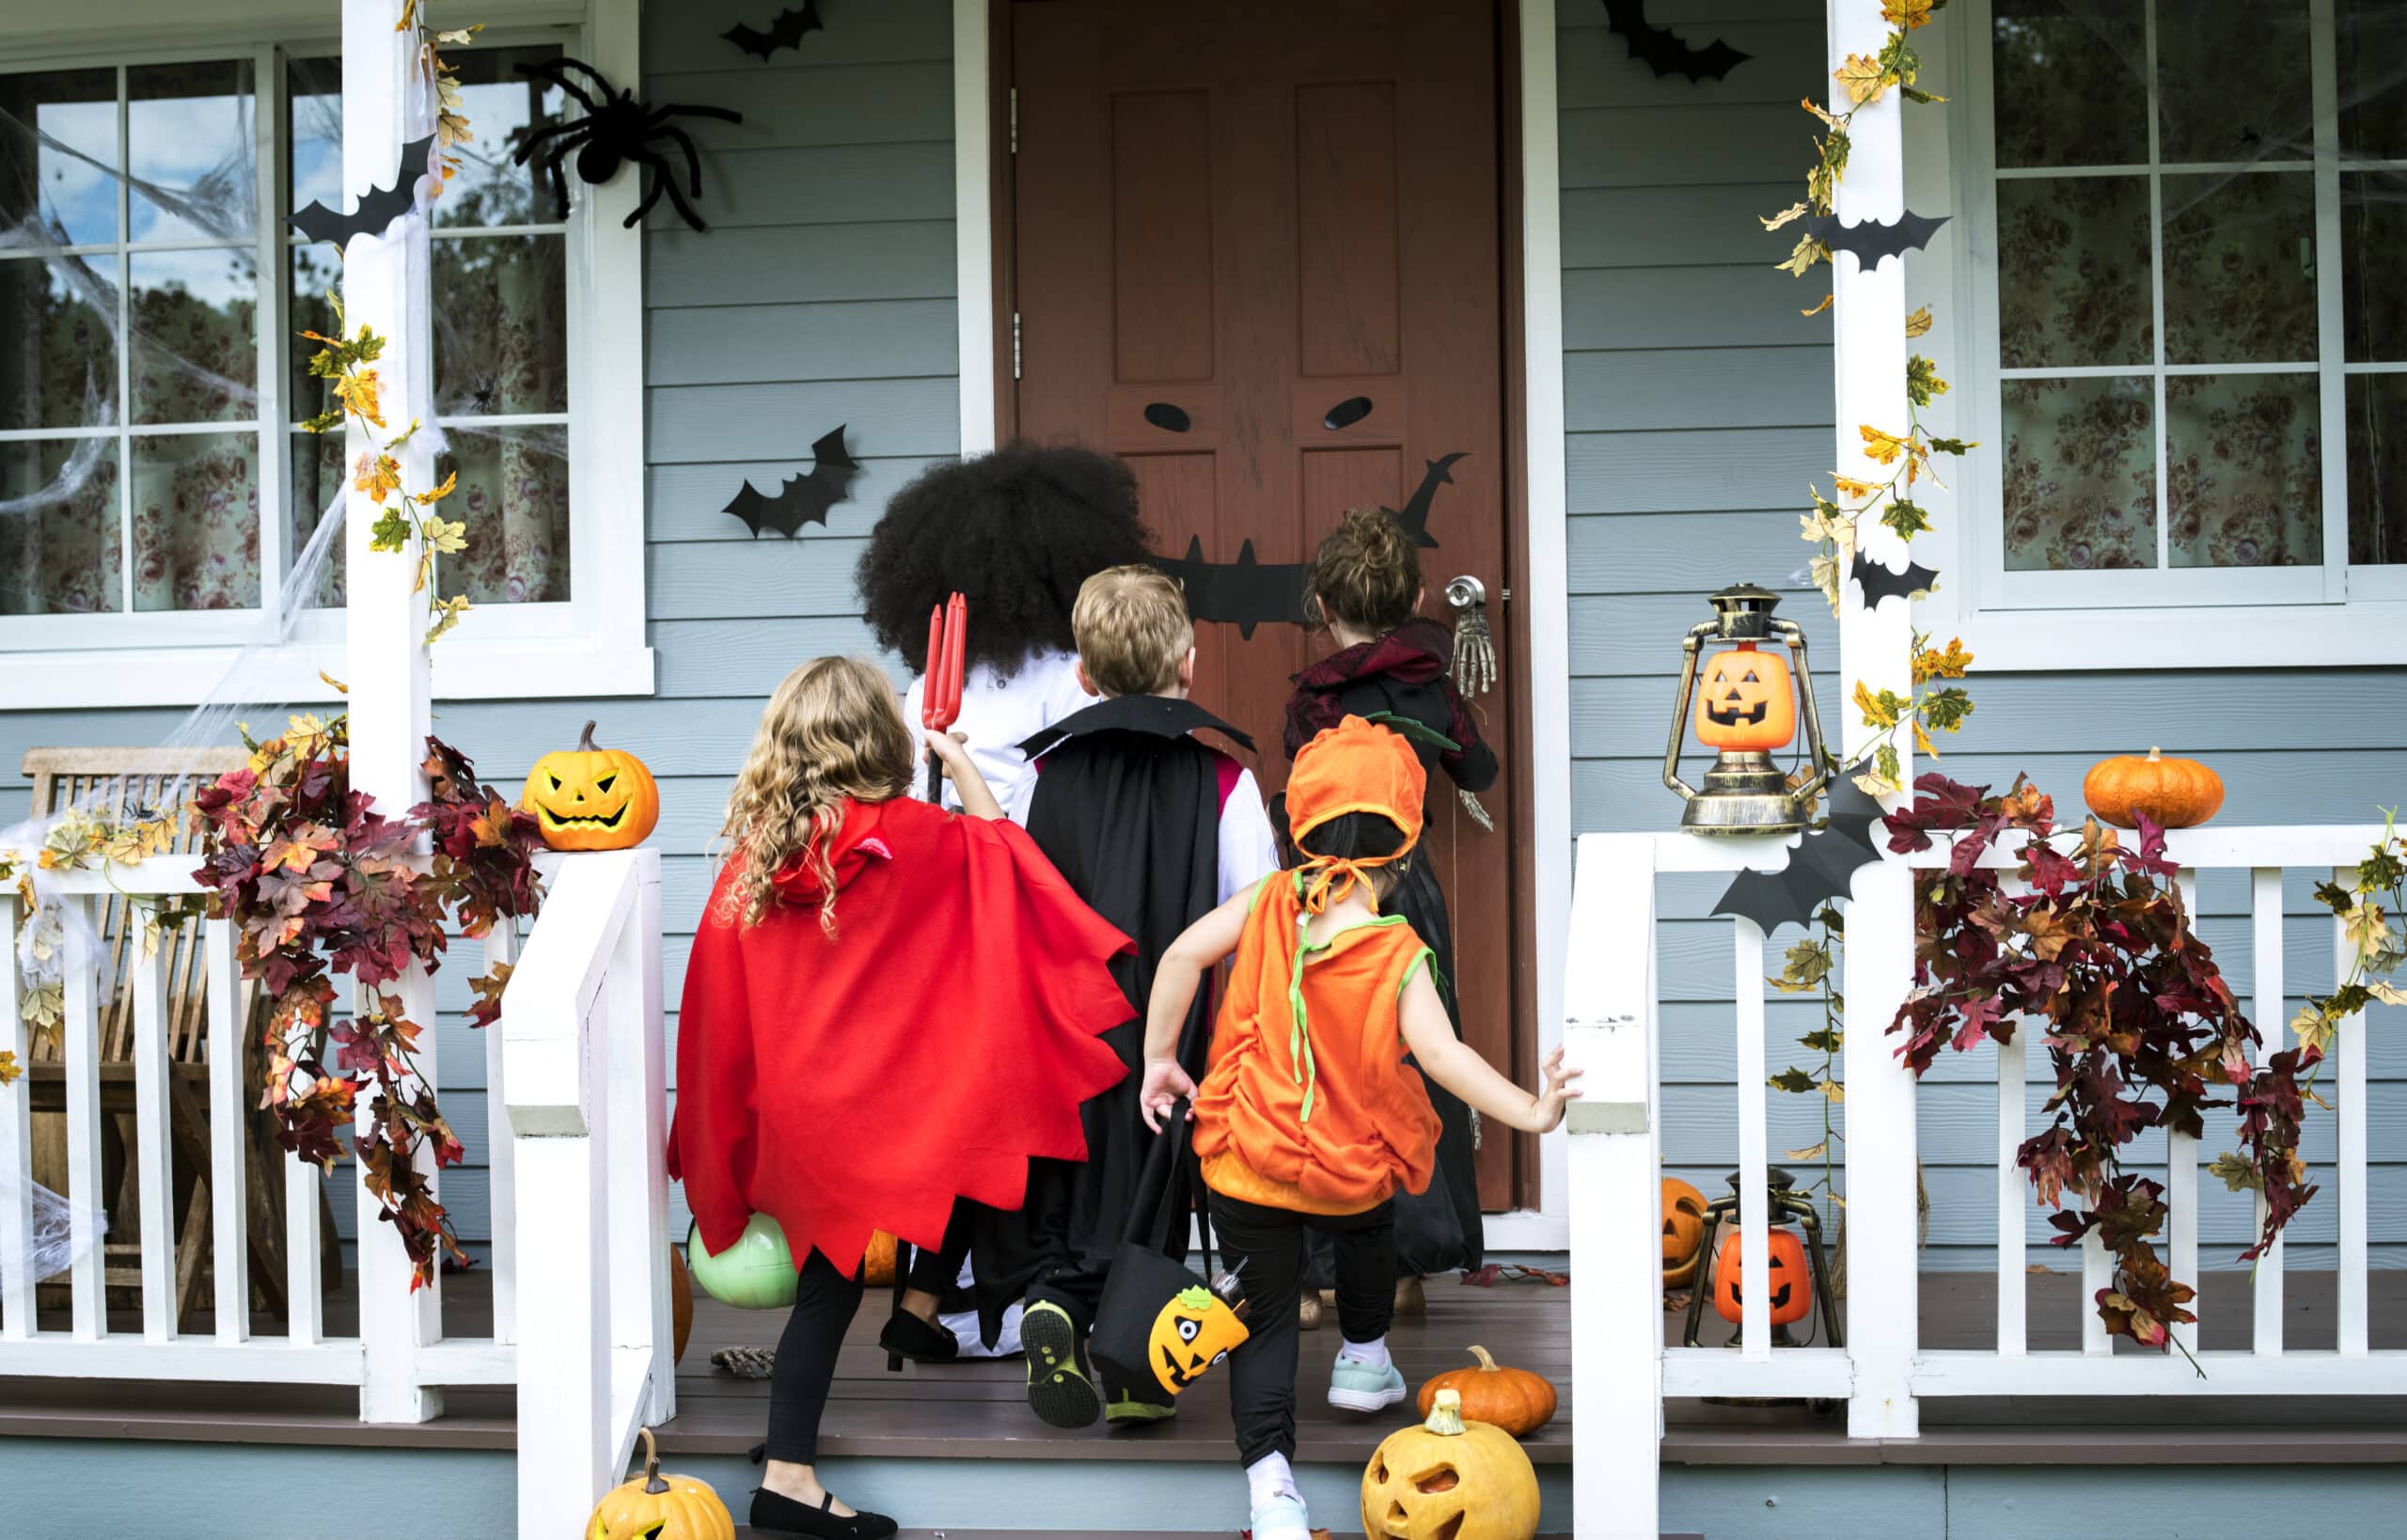 An eco-friendly Halloween: Spooking without harming the environment.